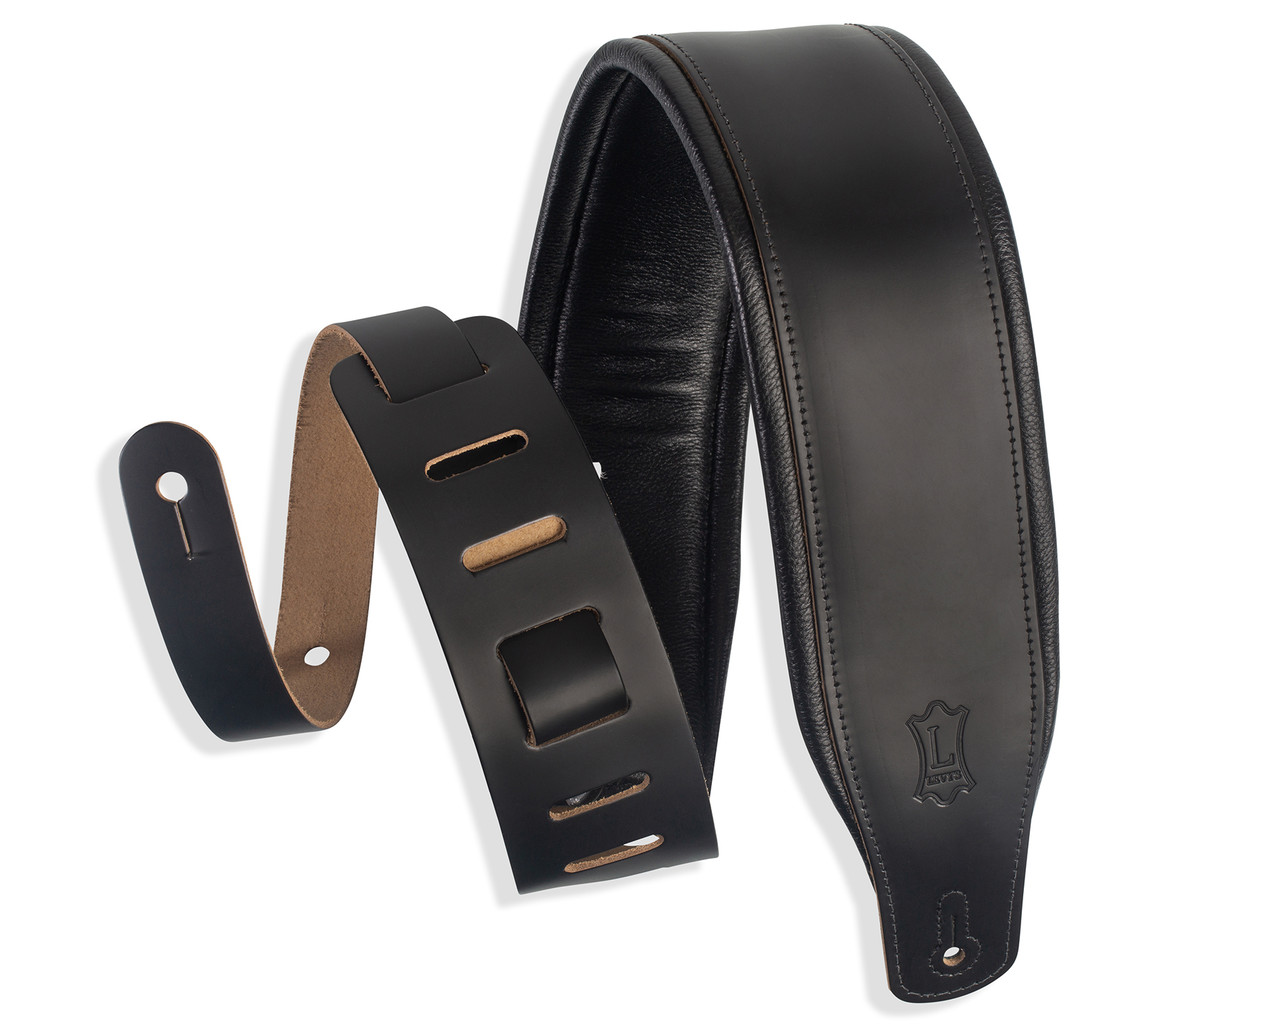 Levy's Classic Series Favorite 3 Padded Leather Guitar Strap - Black